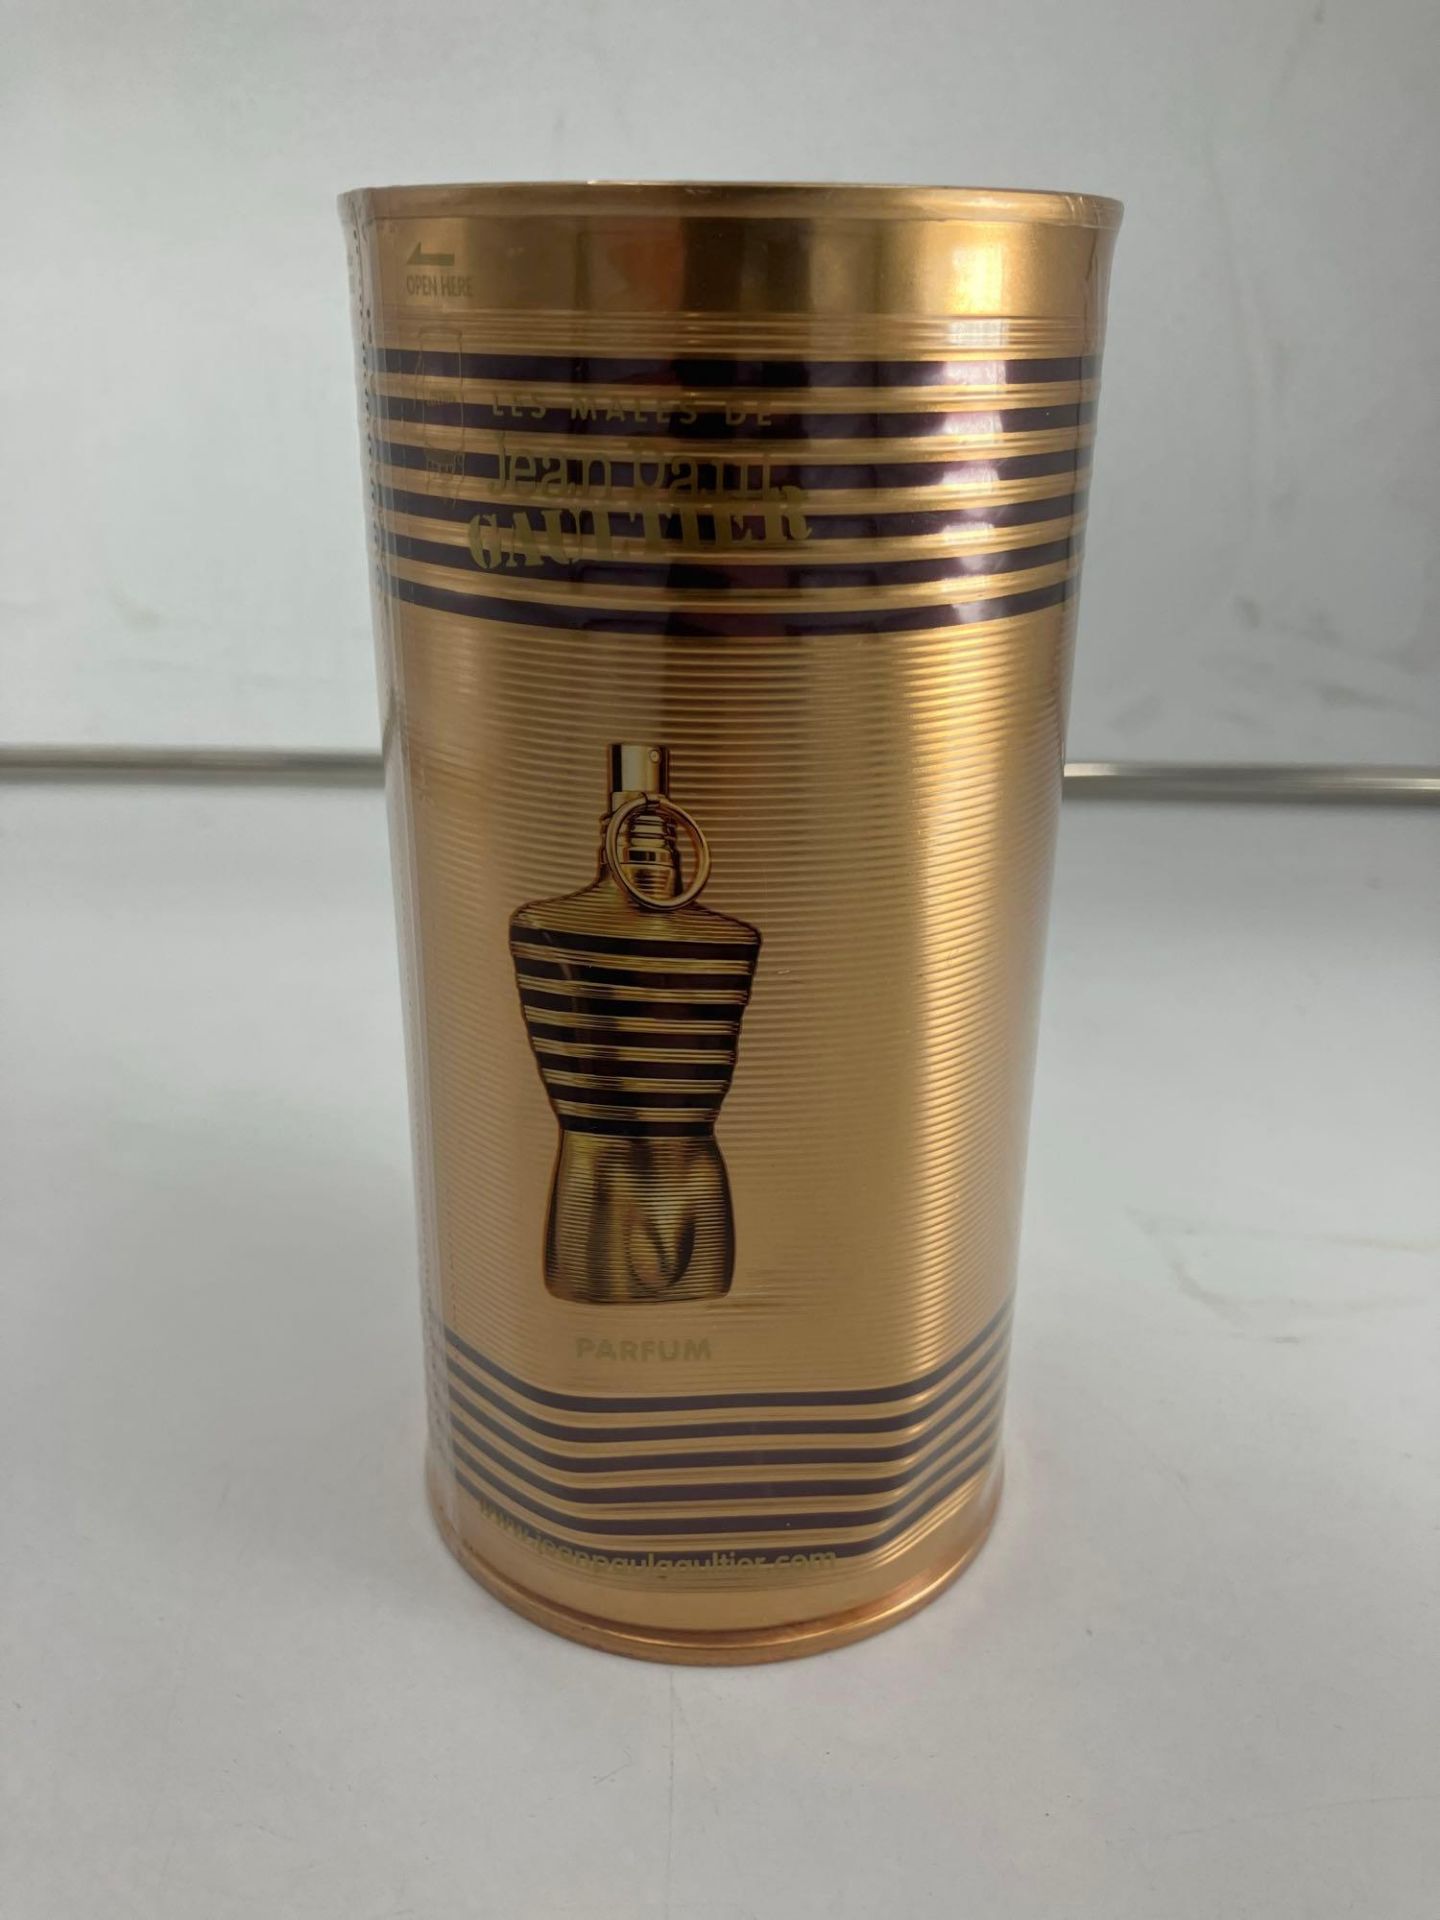 125ML LE MALE ELIXIR PERFUME FOR HIM BY JEAN PAUL GAULTIER-9798 - Image 2 of 2